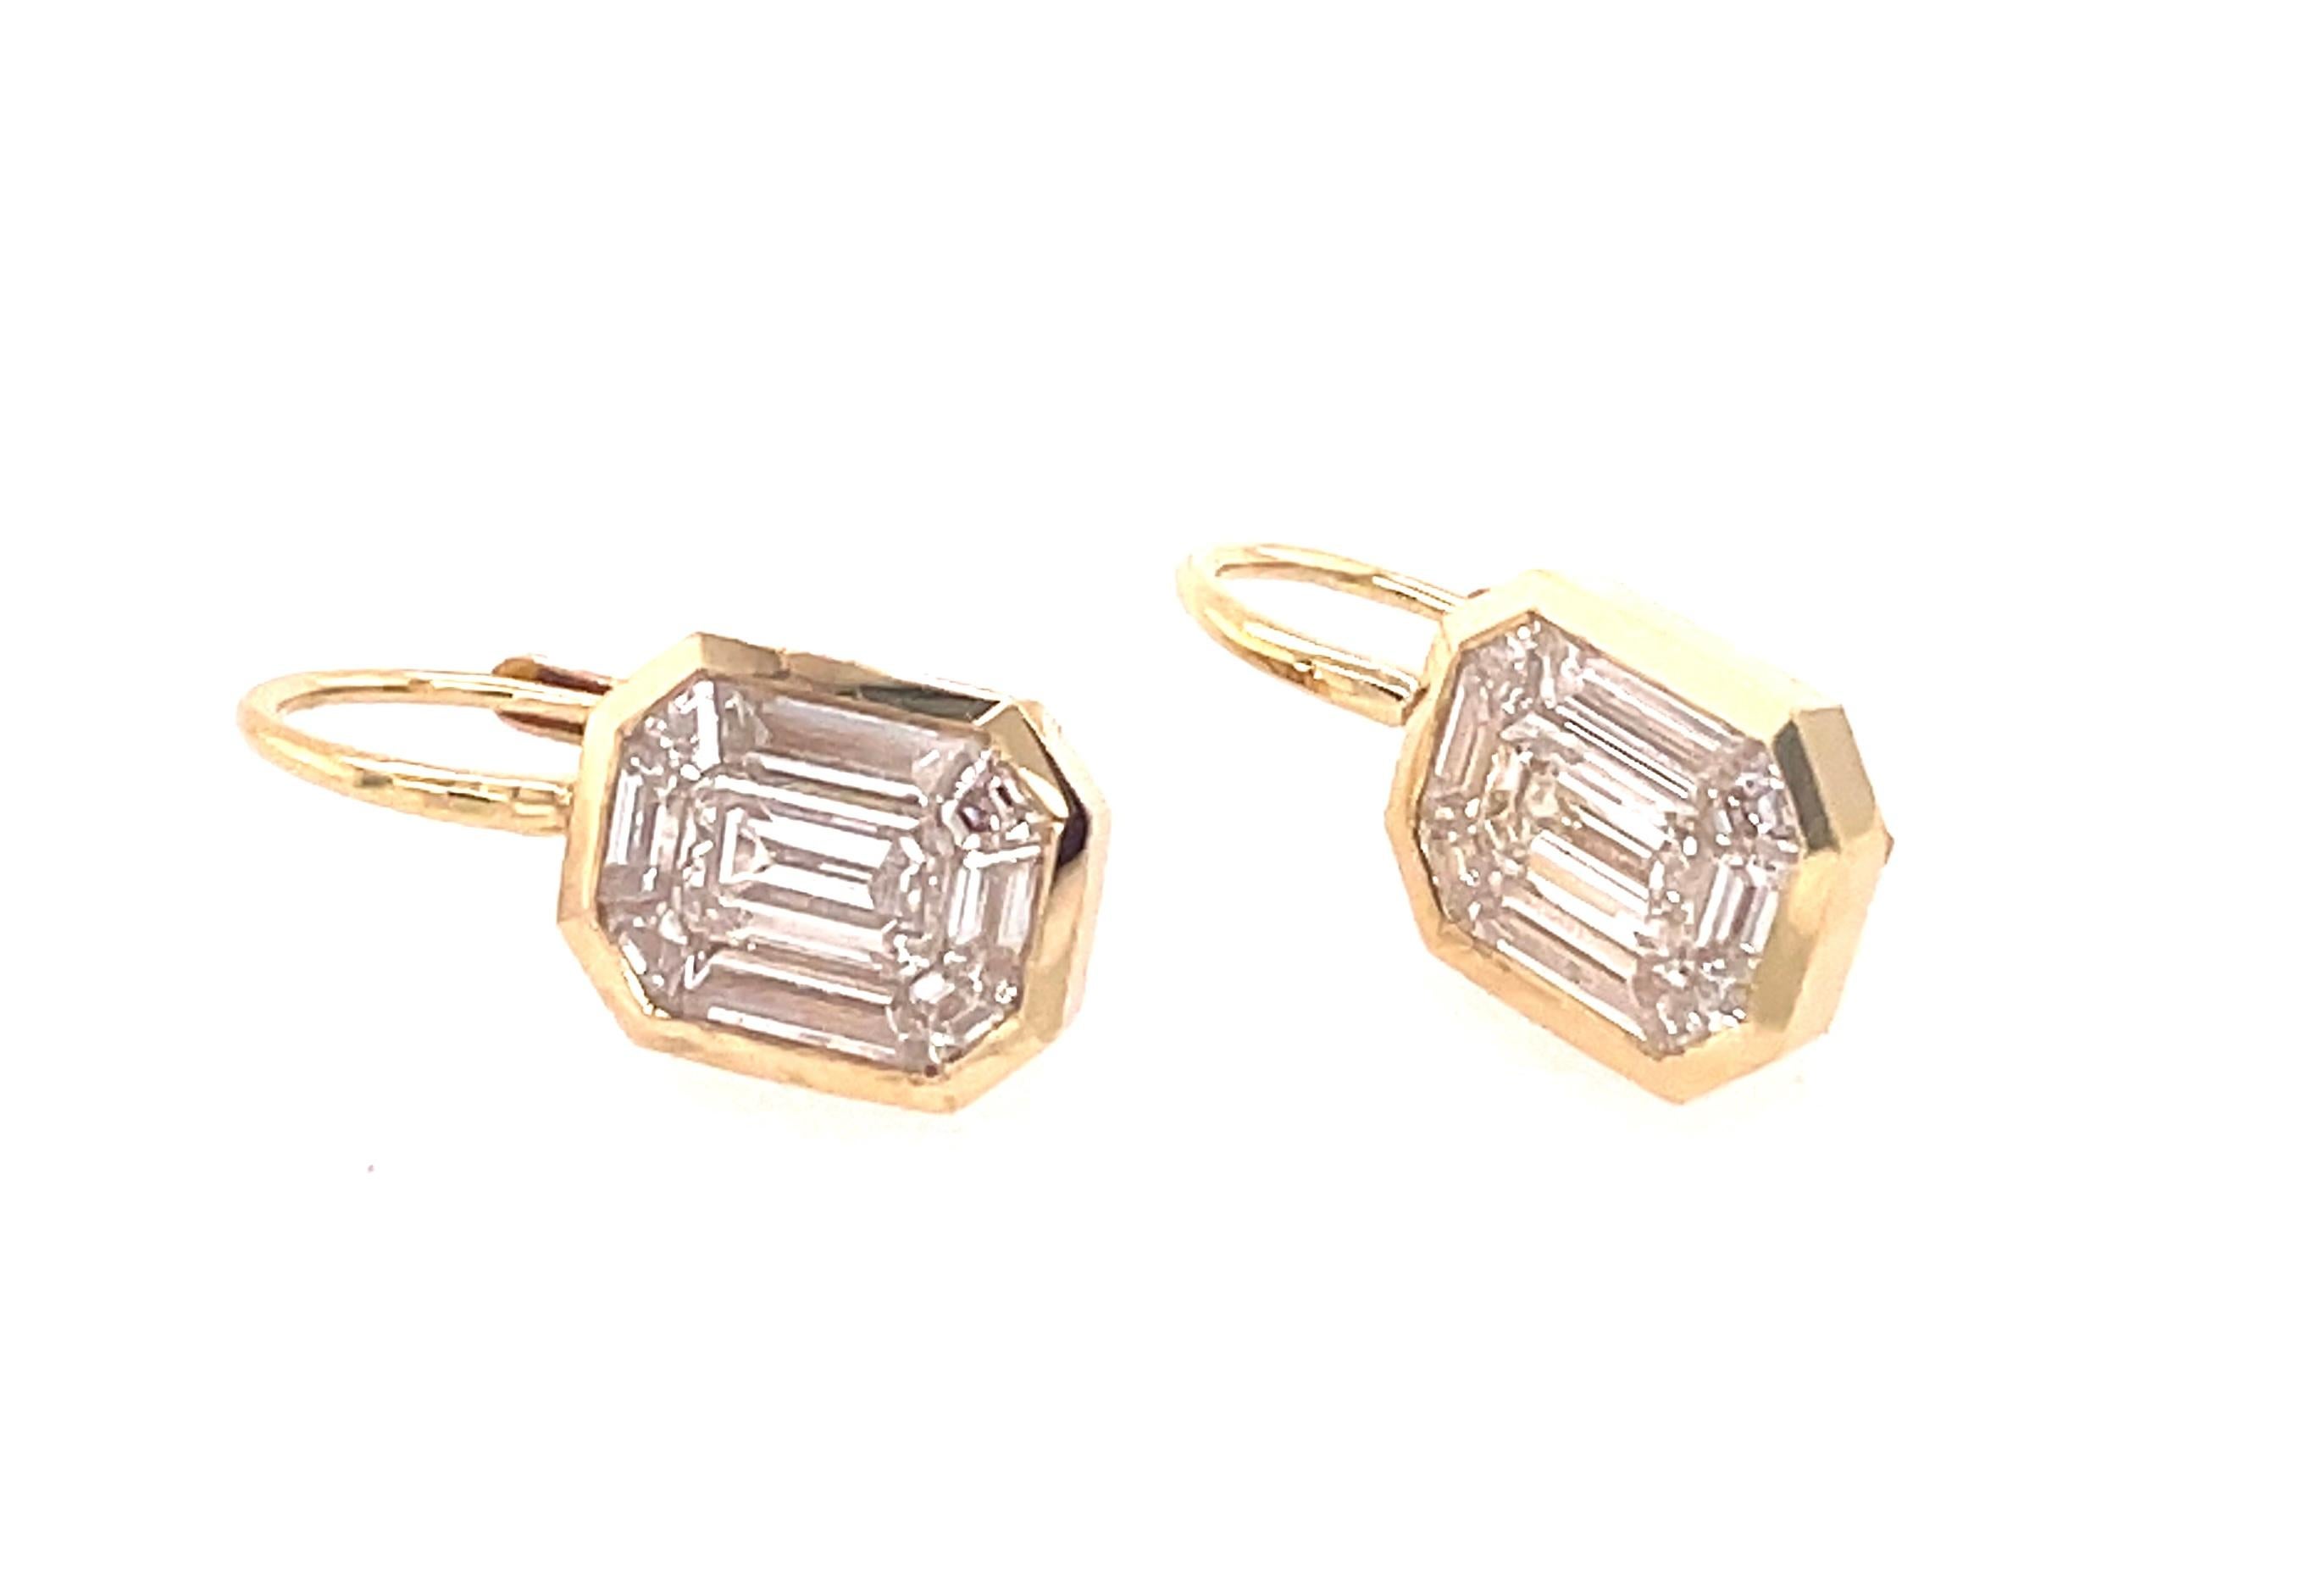 18kt yellow gold diamond earrings by Rahaminov Diamonds from their Kaleido collection.
18 diamonds total in these beautiful drop earrings. G-H VS clarity. 
Total Carat Weight of 1.85